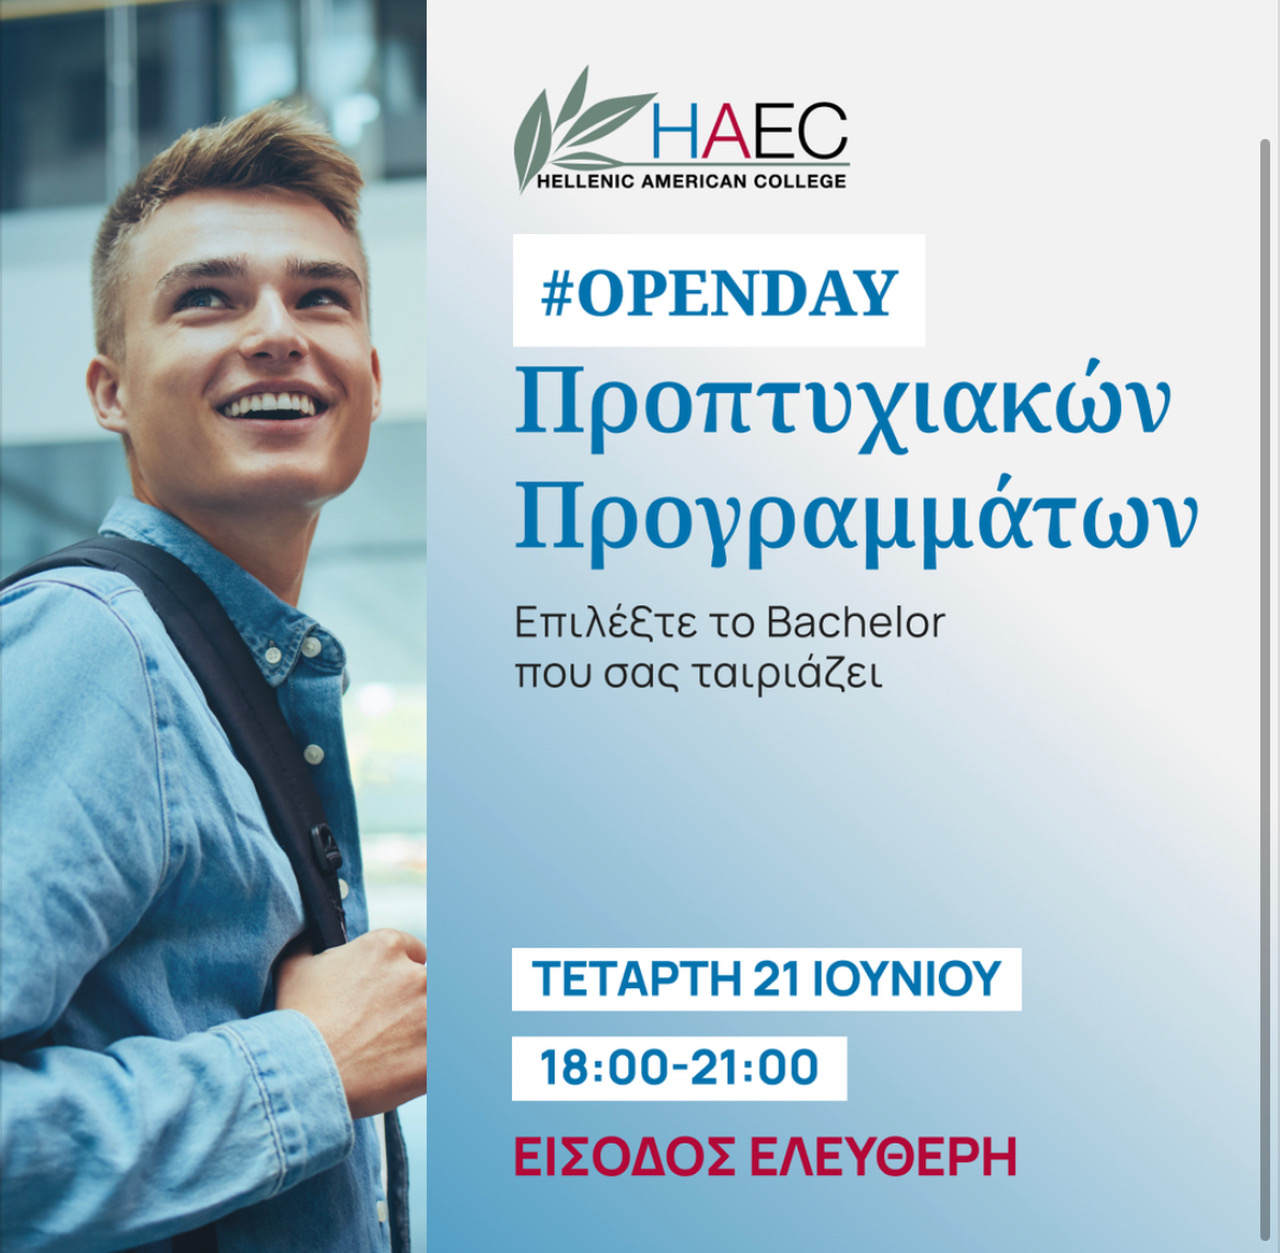 OPEN DAY | Hellenic American College